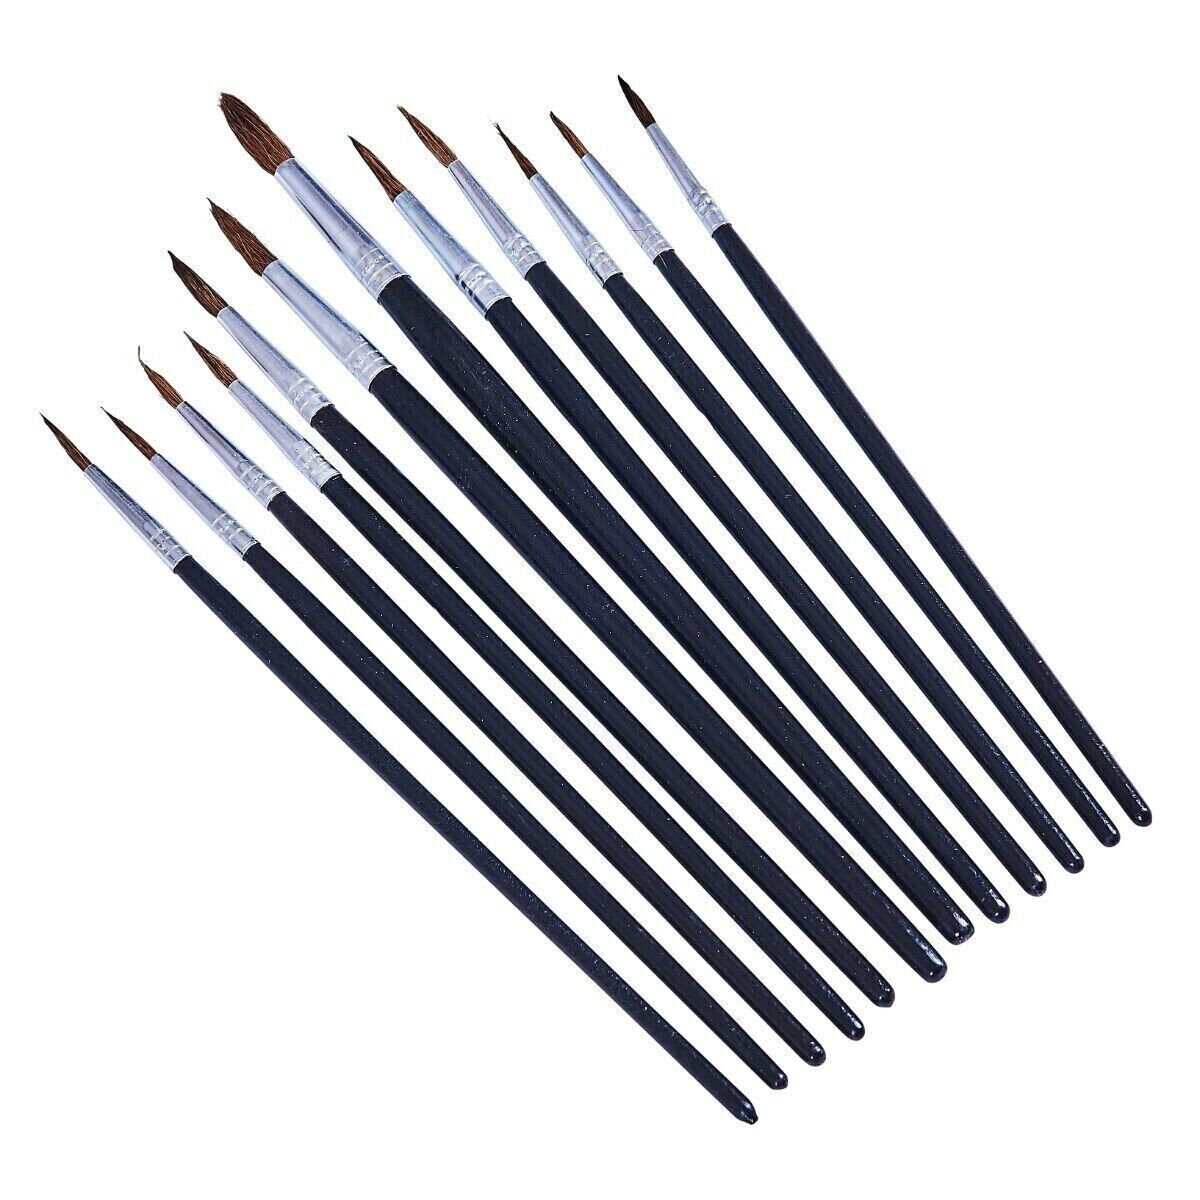 Fine Tip Paint Brush 12 Pk Micro Brushes for Detail Painting Miniature  Models & Polyresin Figurines, Watercolor, Acrylic, Model Art Crafts 